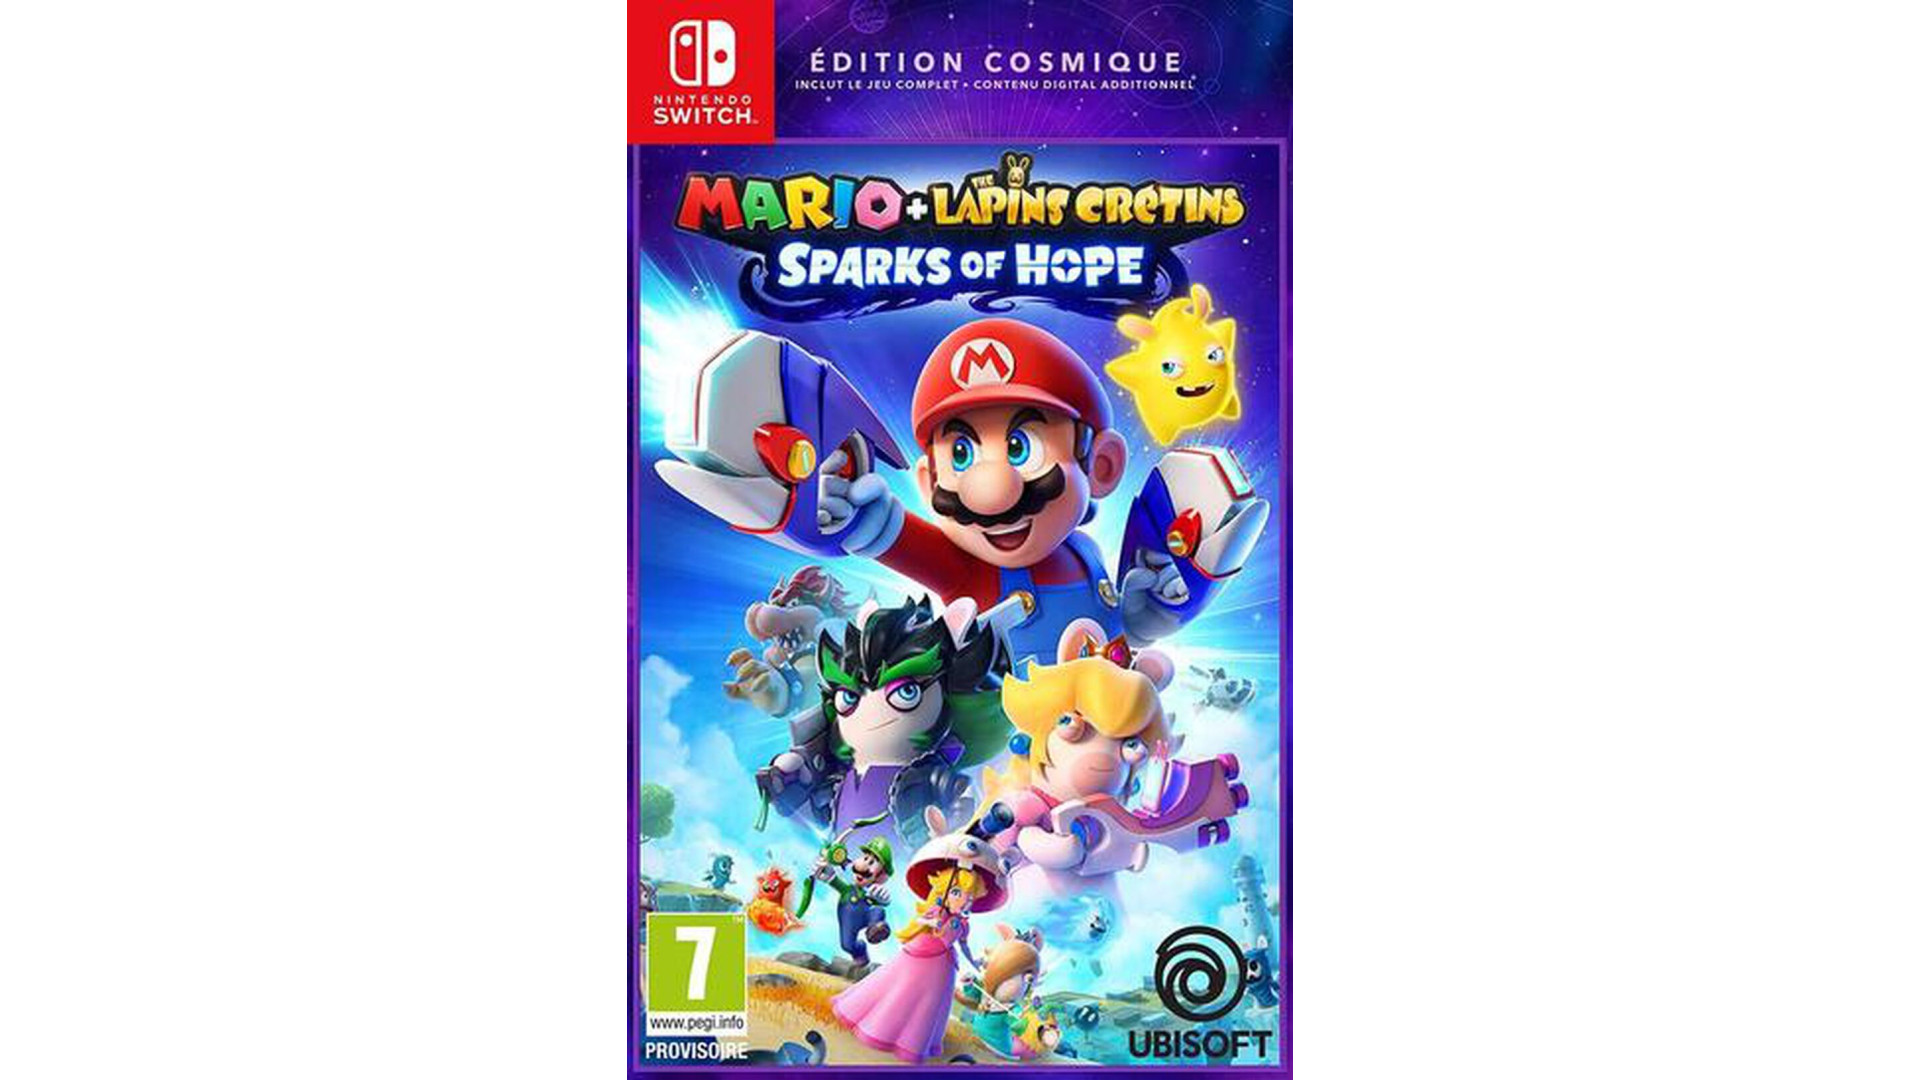 Acheter Mario + Les Lapins Cretins Sparks Of Hope Edition Cosmique SWITCH